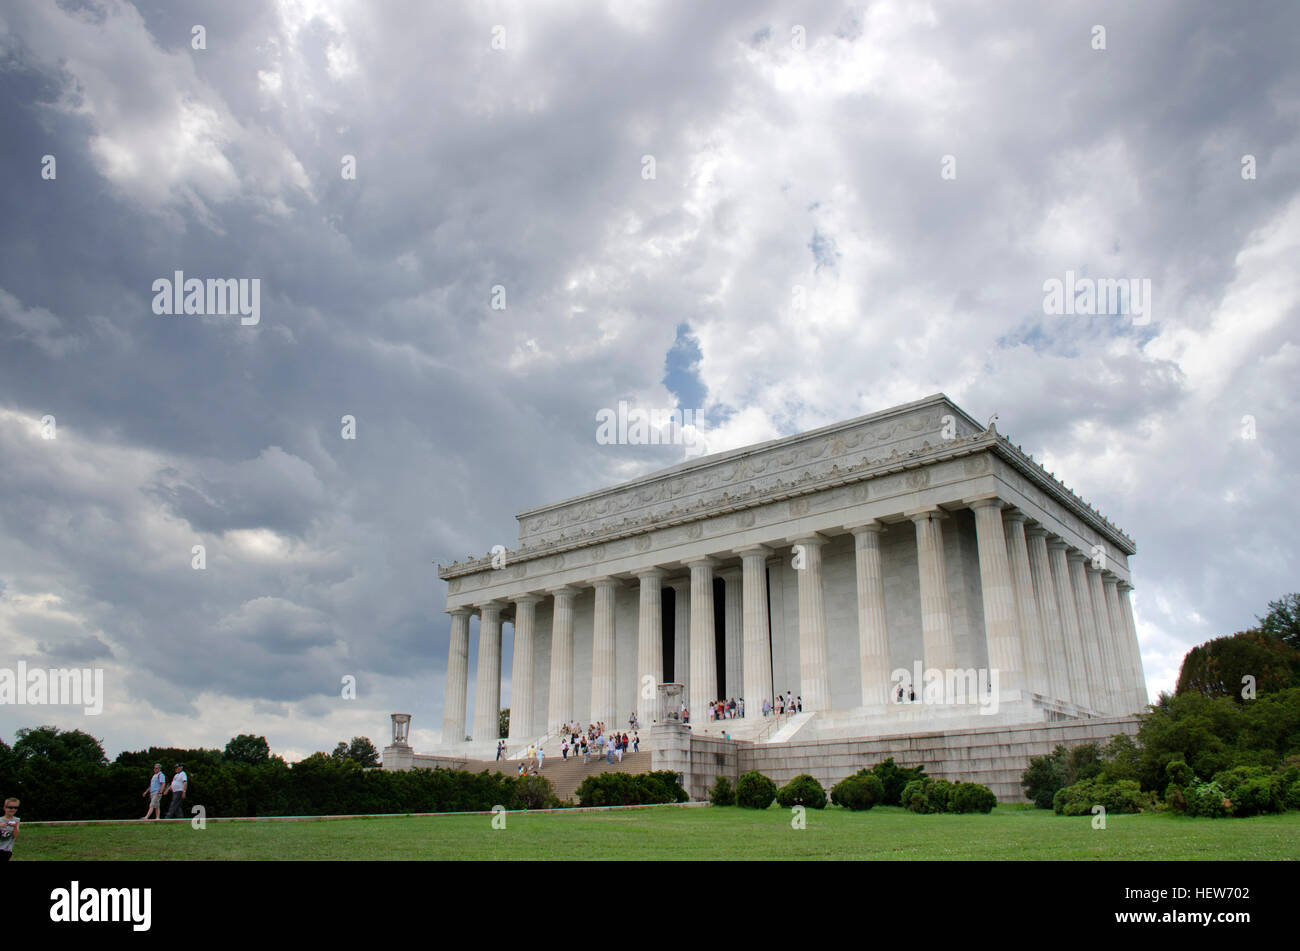 Dramatic skies over the Lincoln Memorial in Washington, DC. Stock Photo